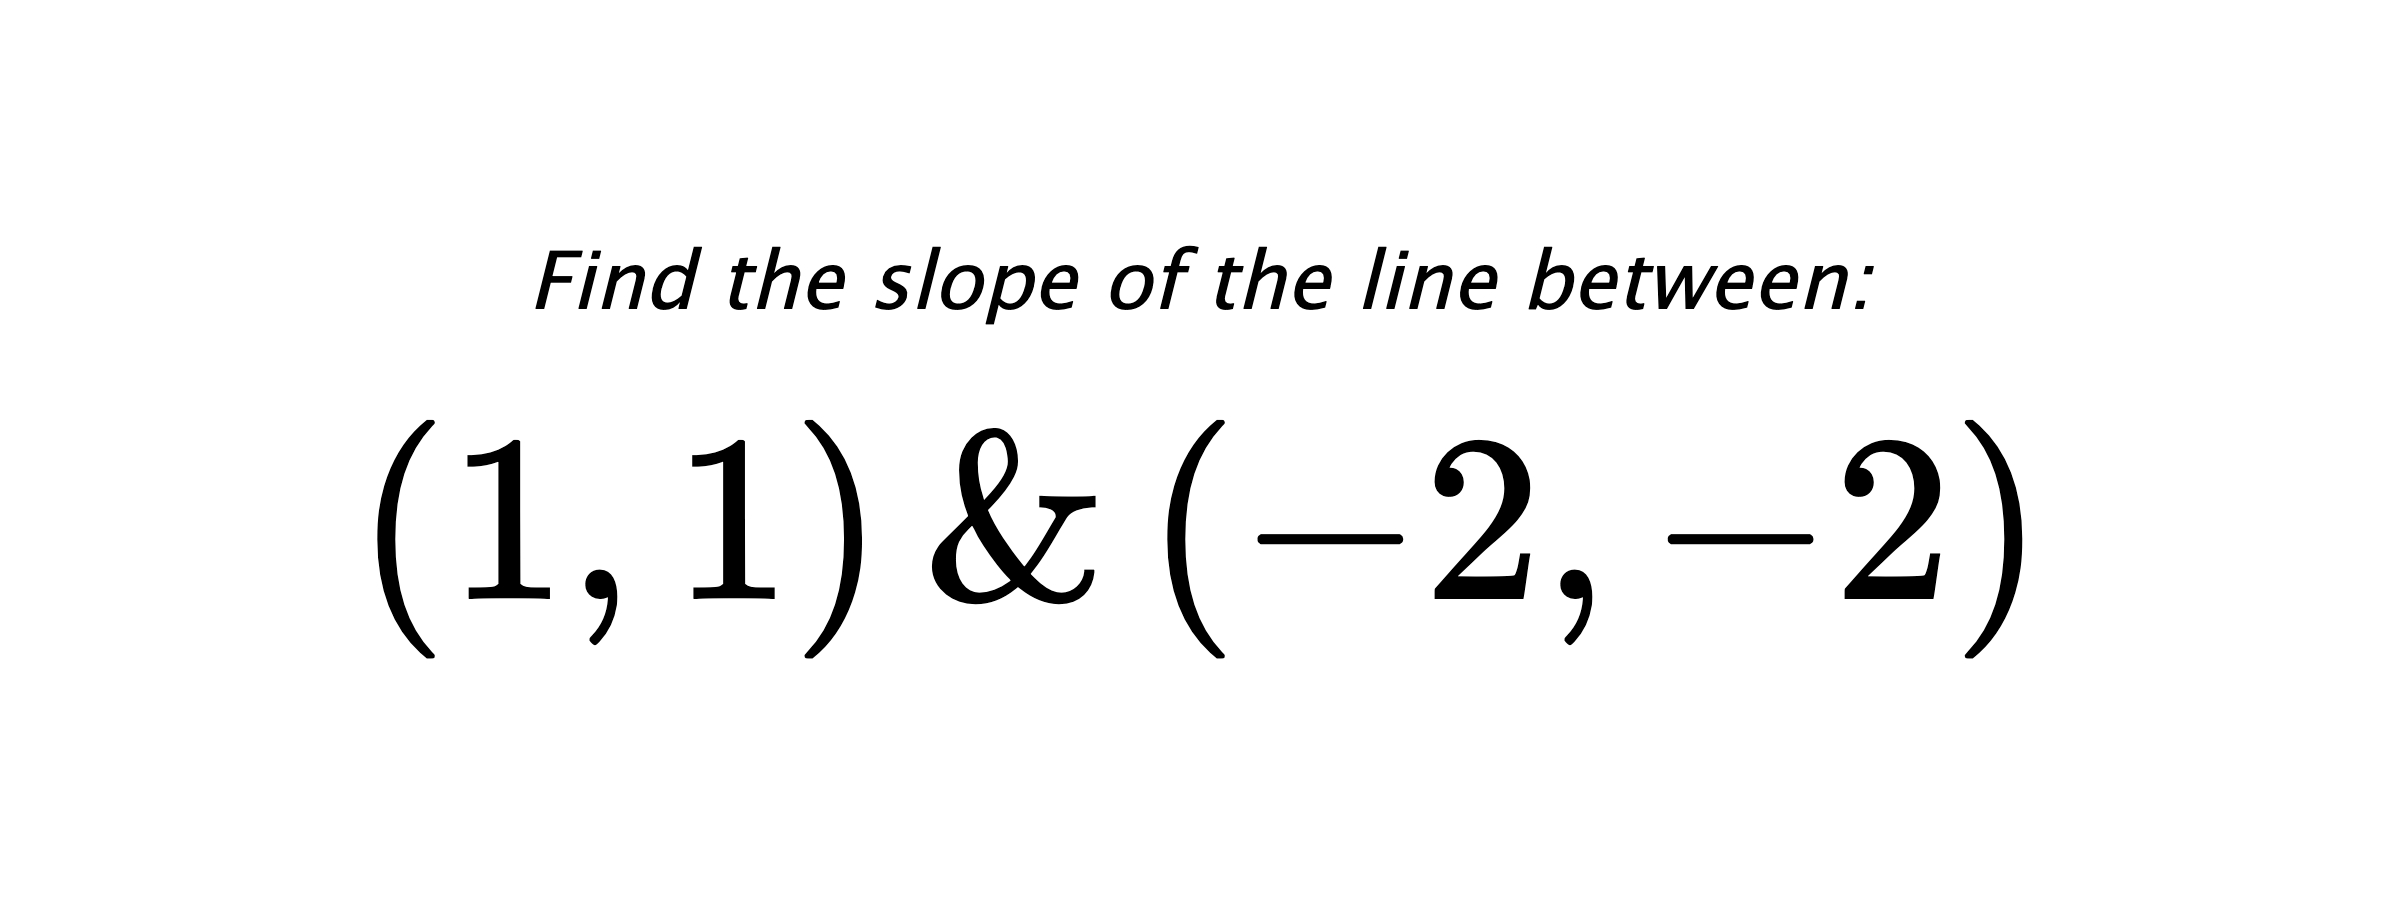 Find the slope of the line between: $ (1,1) \hspace{0.5cm} \text{&} \hspace{0.5cm} (-2,-2) $